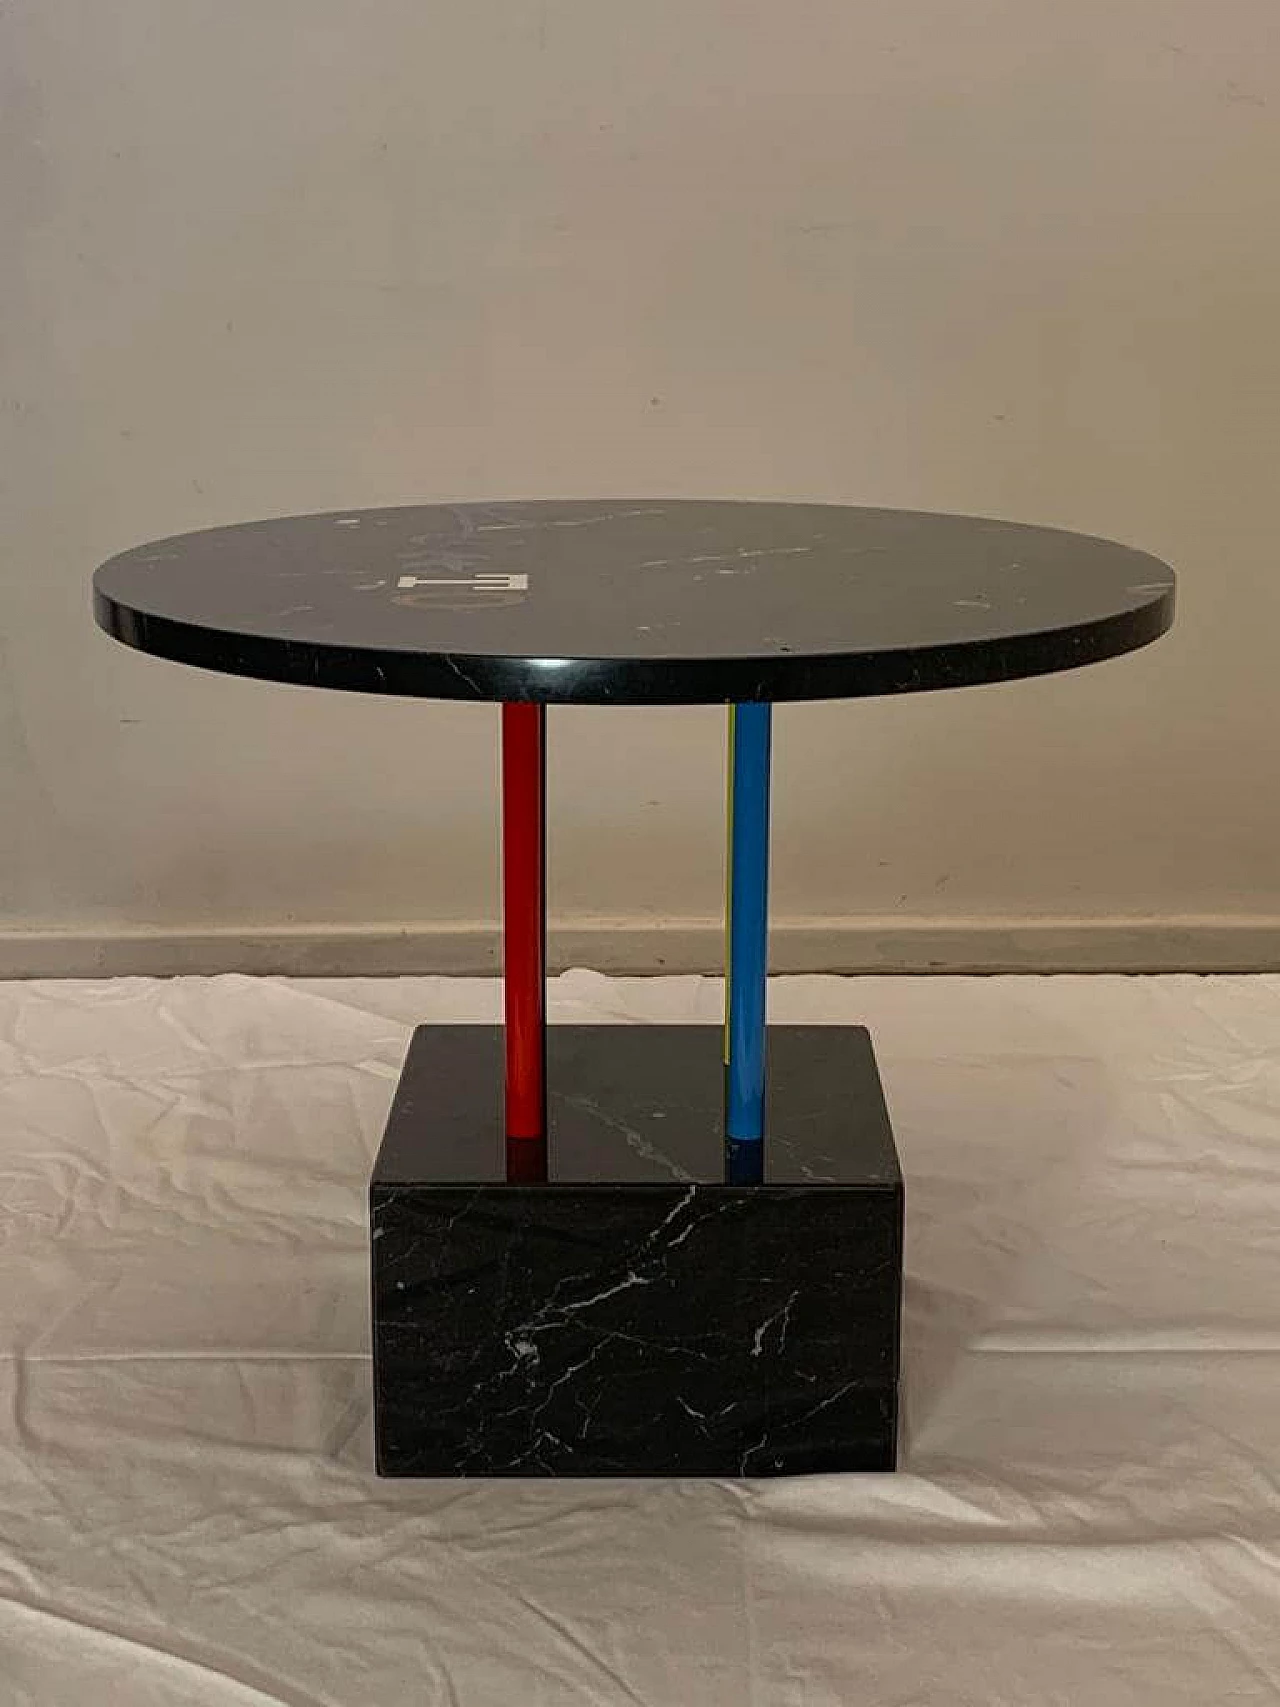 Kleeto coffee table by Cleto Munari, unique piece with inlaid marble 1312103